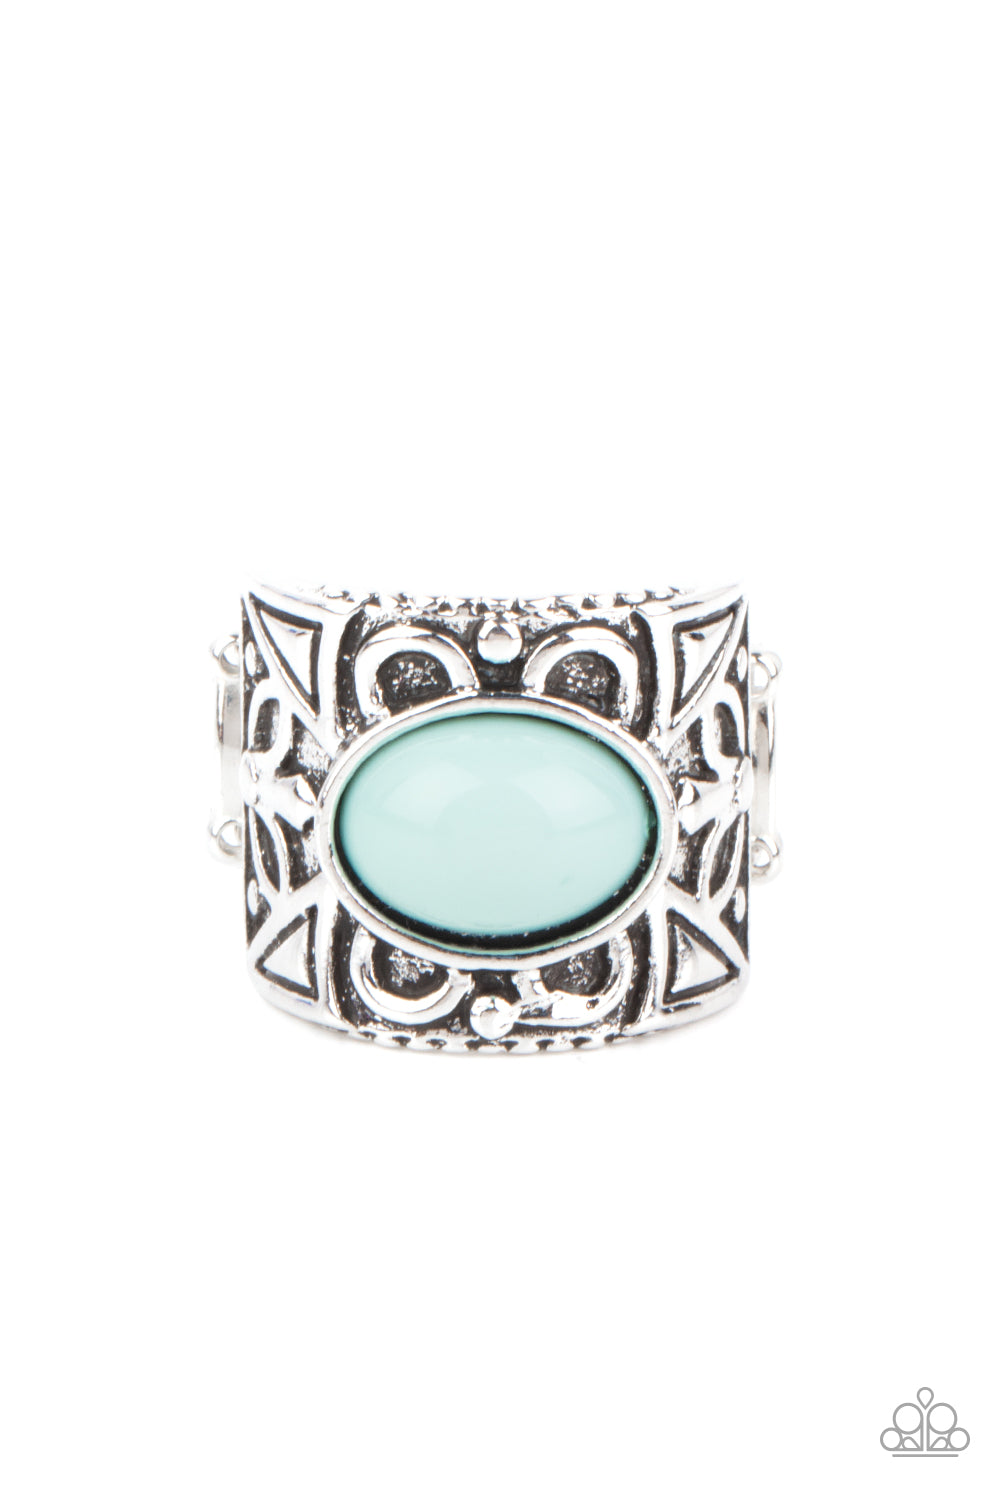 Bubbly Bonanza Blue Ring - Paparazzi Accessories  A bubbly blue bead is pressed into the center of a thick silver frame embossed in a leafy geometric pattern, creating a colorfully whimsical centerpiece. Features a stretchy band for a flexible fit.  All Paparazzi Accessories are lead free and nickel free!  Sold as one individual ring.